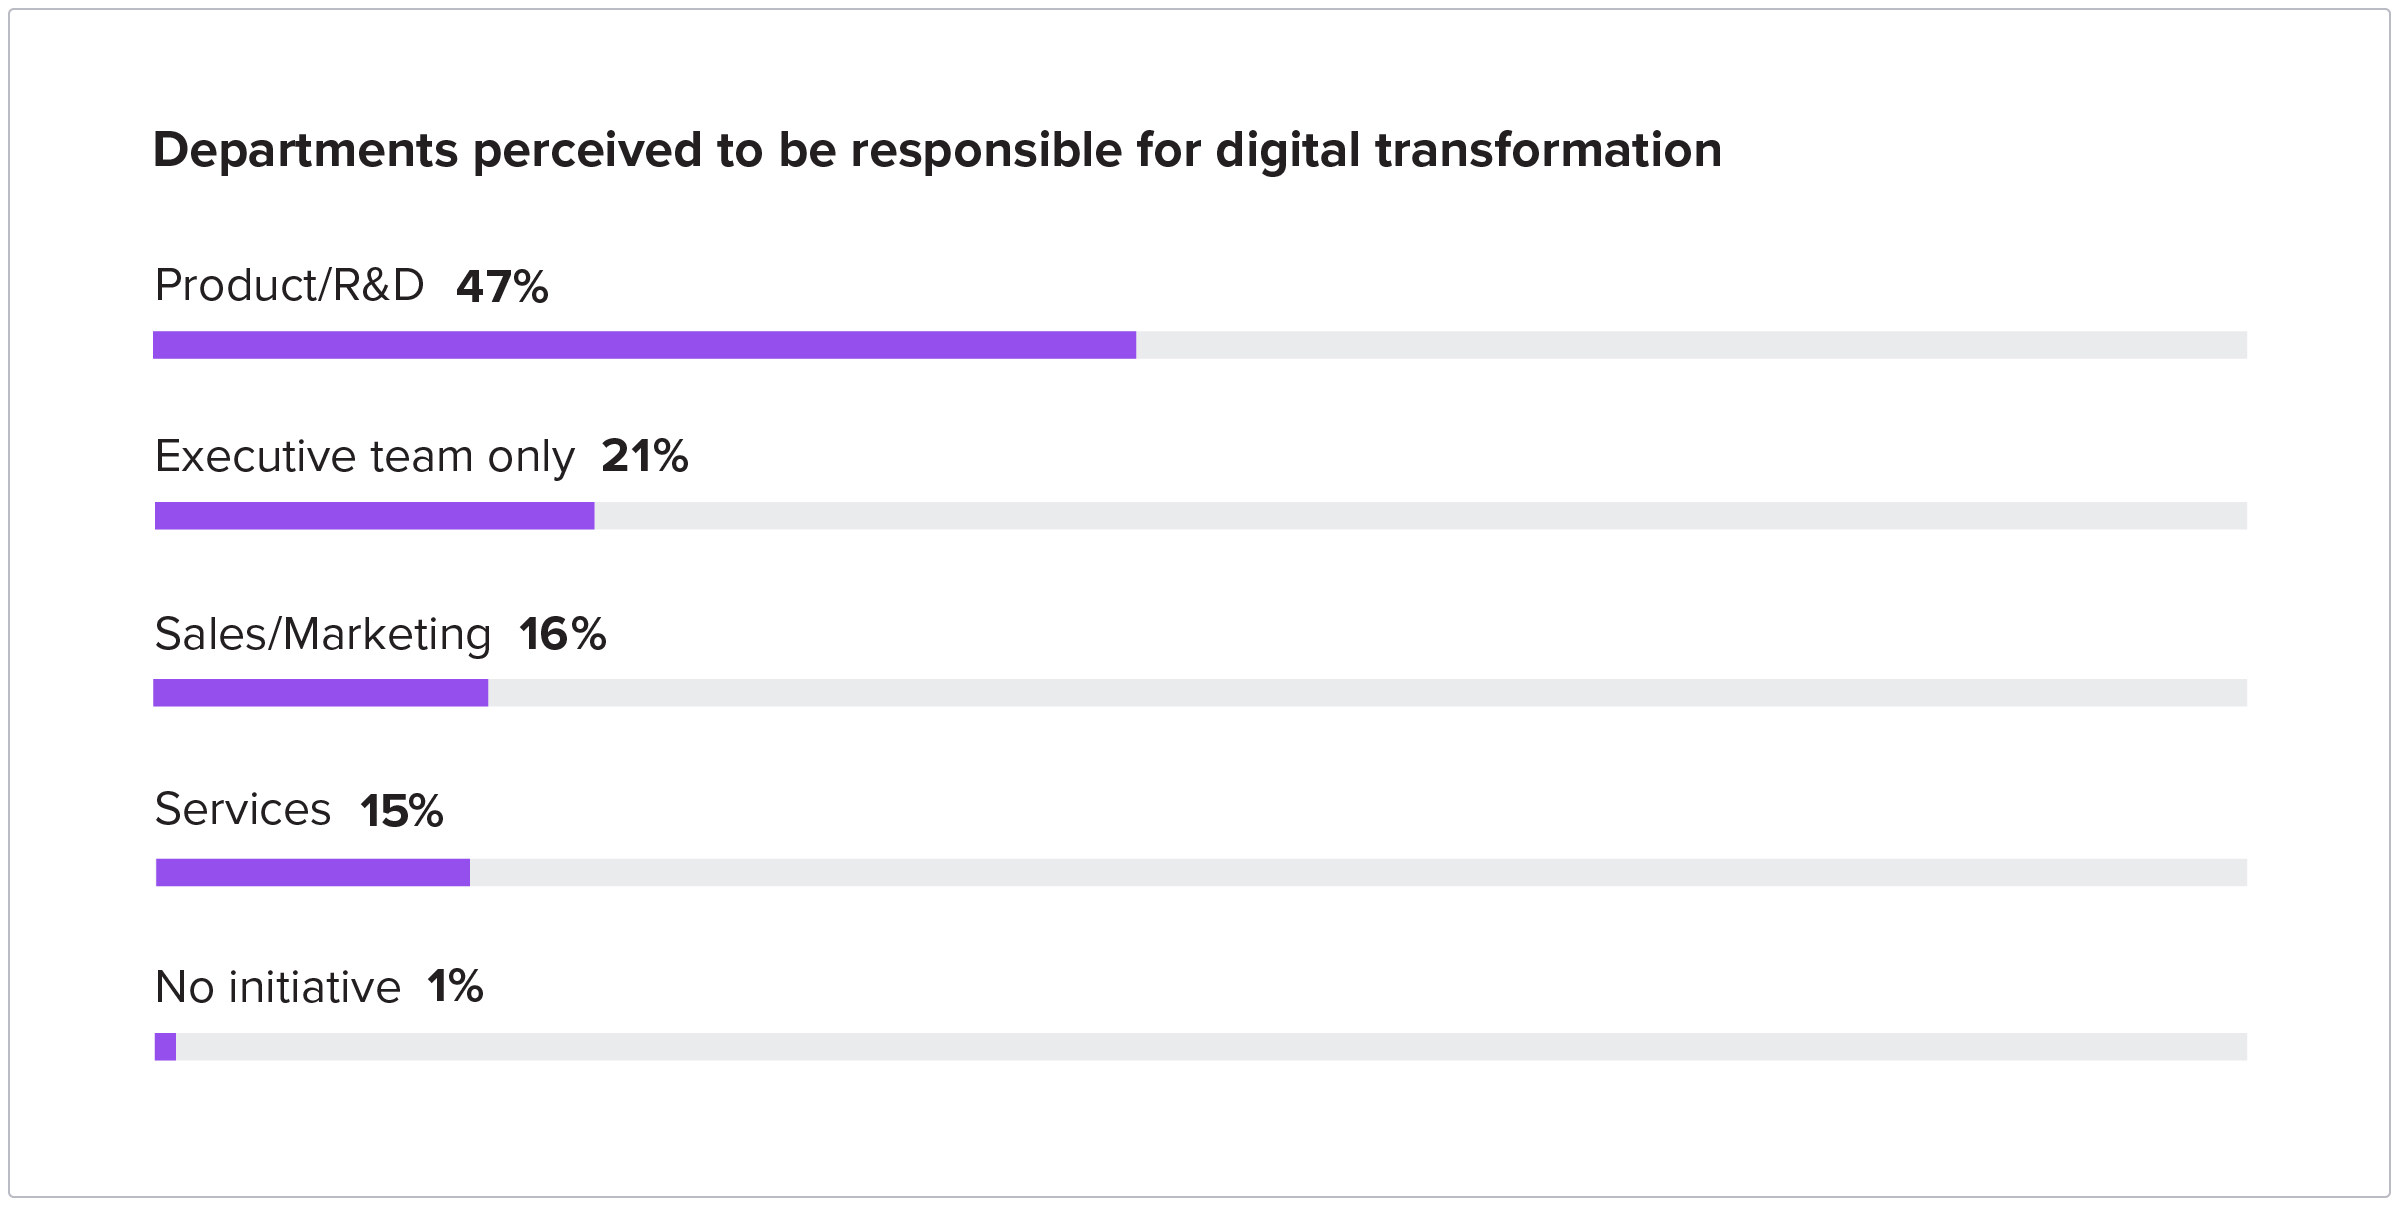 Departments perceived to be responsible for digital transformation - Product R&D 47%, Executive team only 21%, Sales/Marketing 16%, Services 15%, No initiative 1%